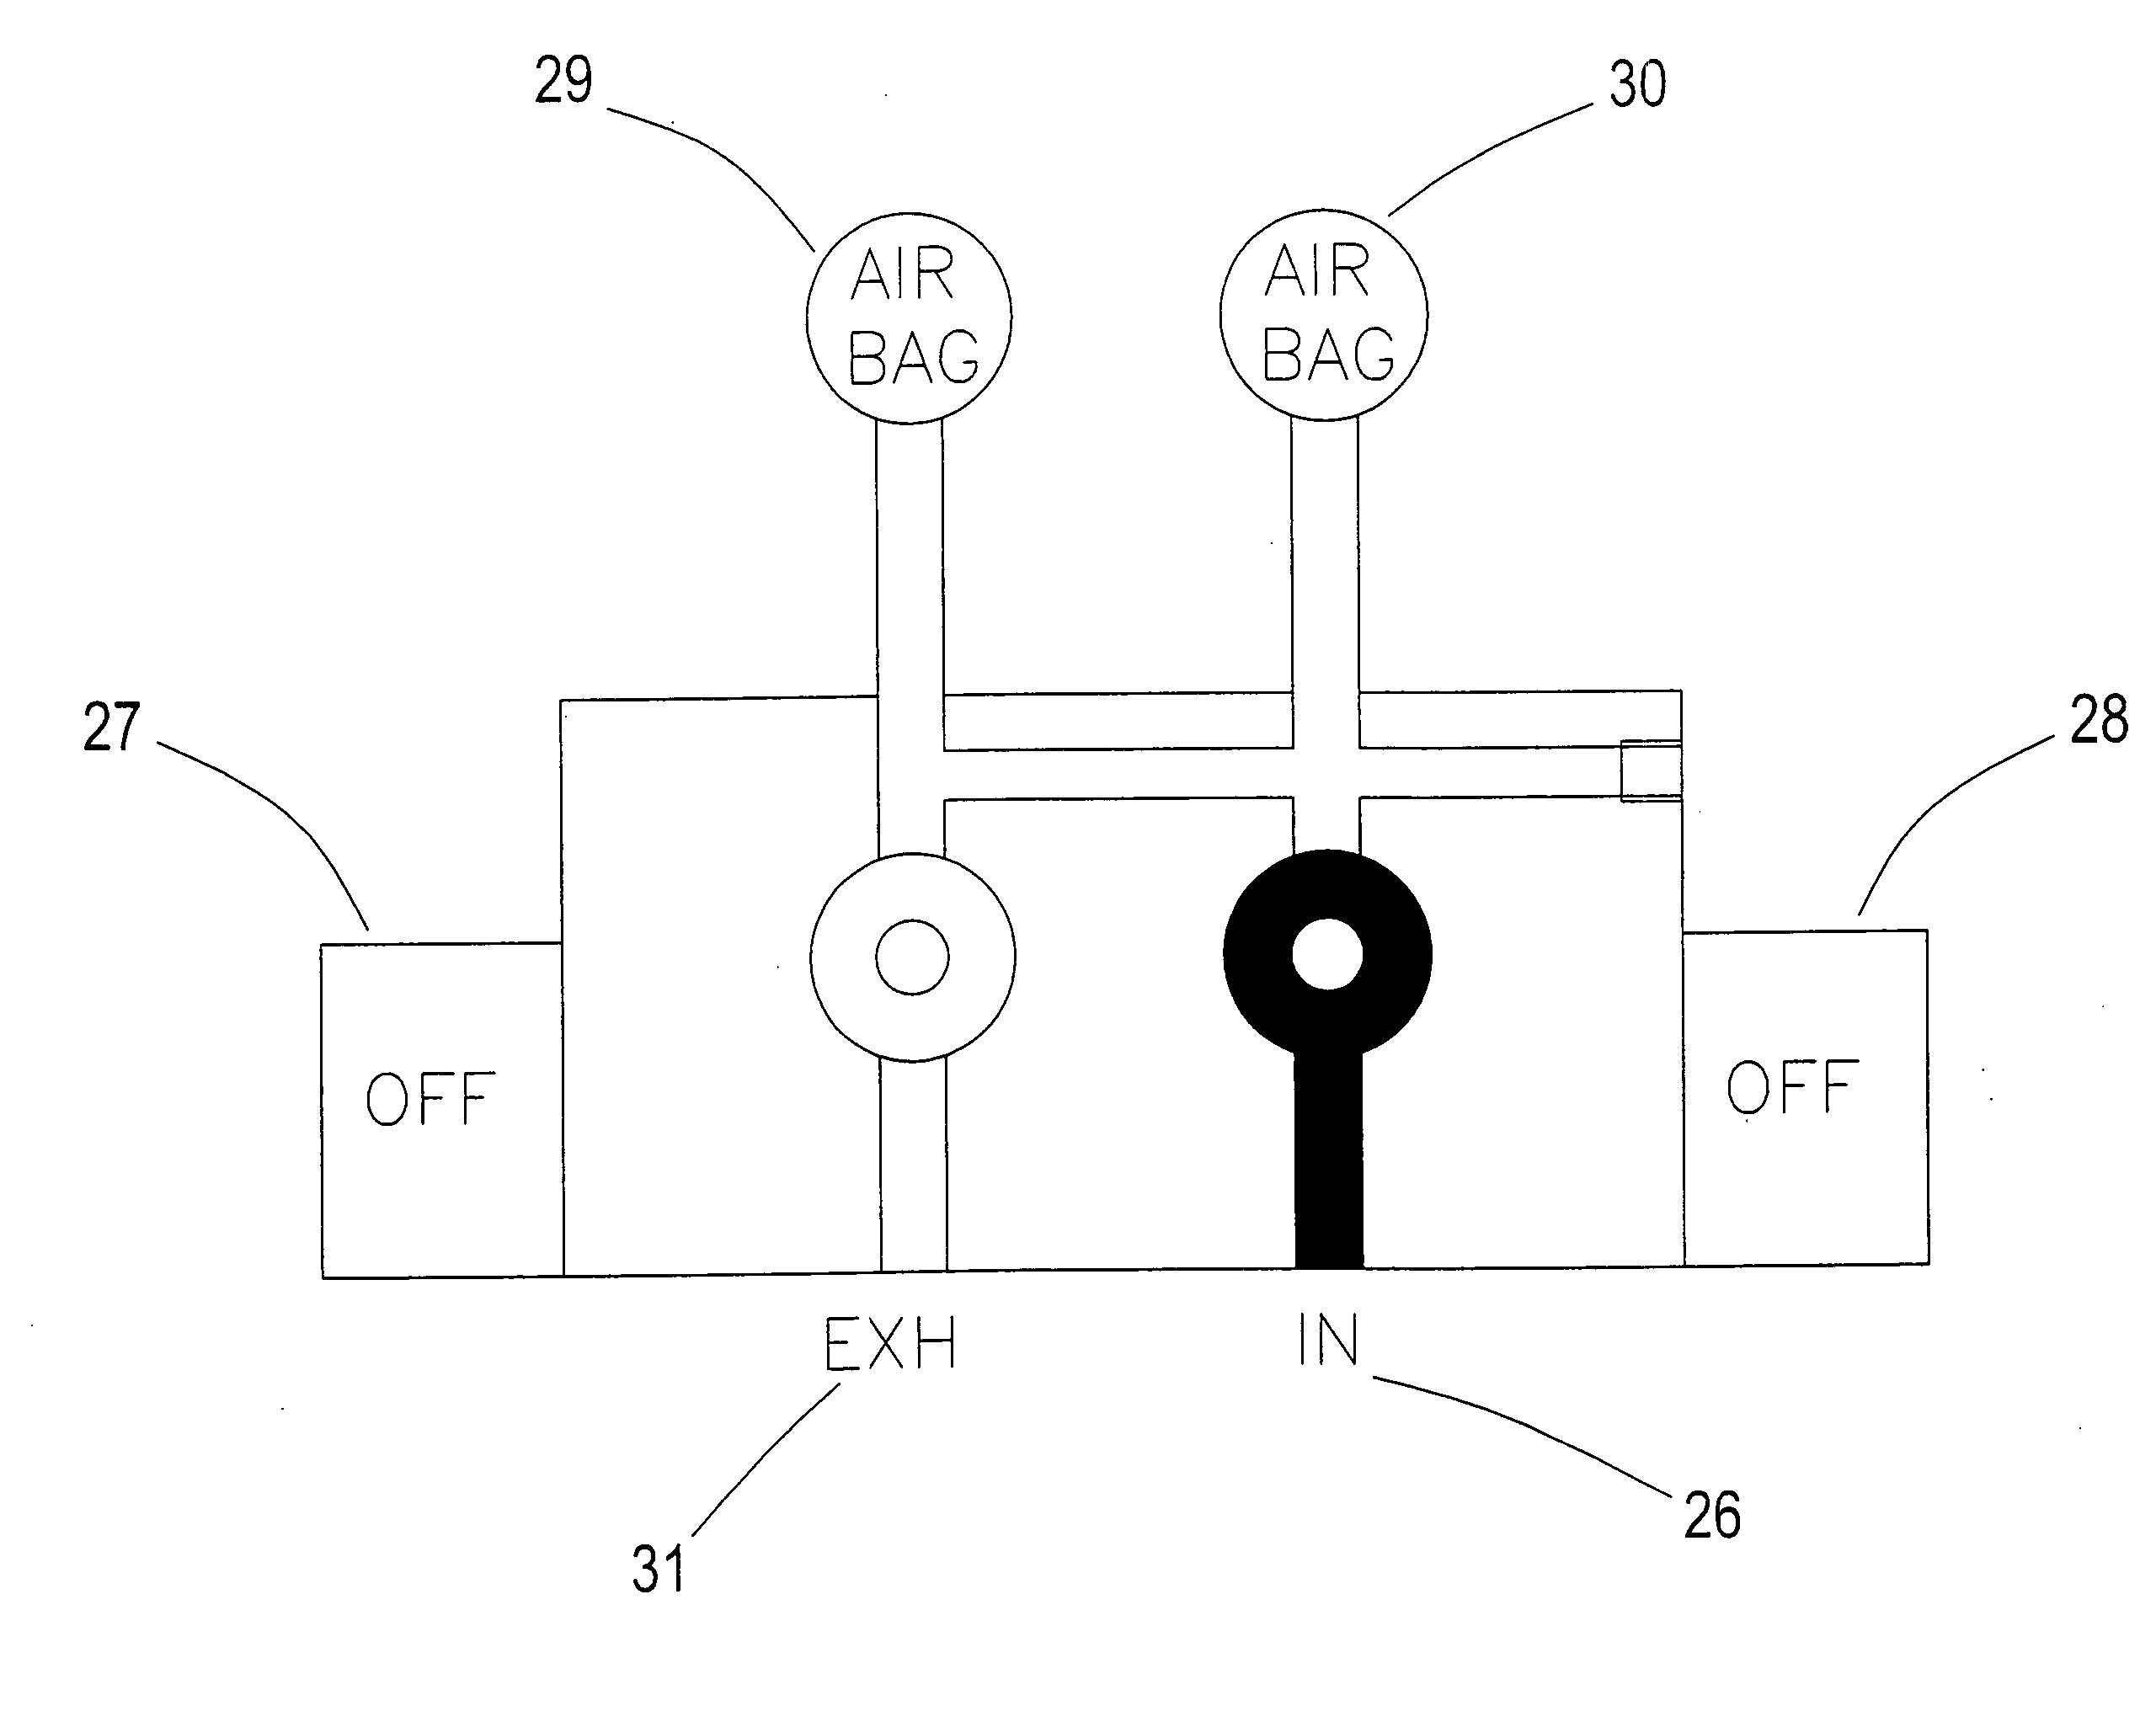 Electromagnetic valve assembly for controlling airbag